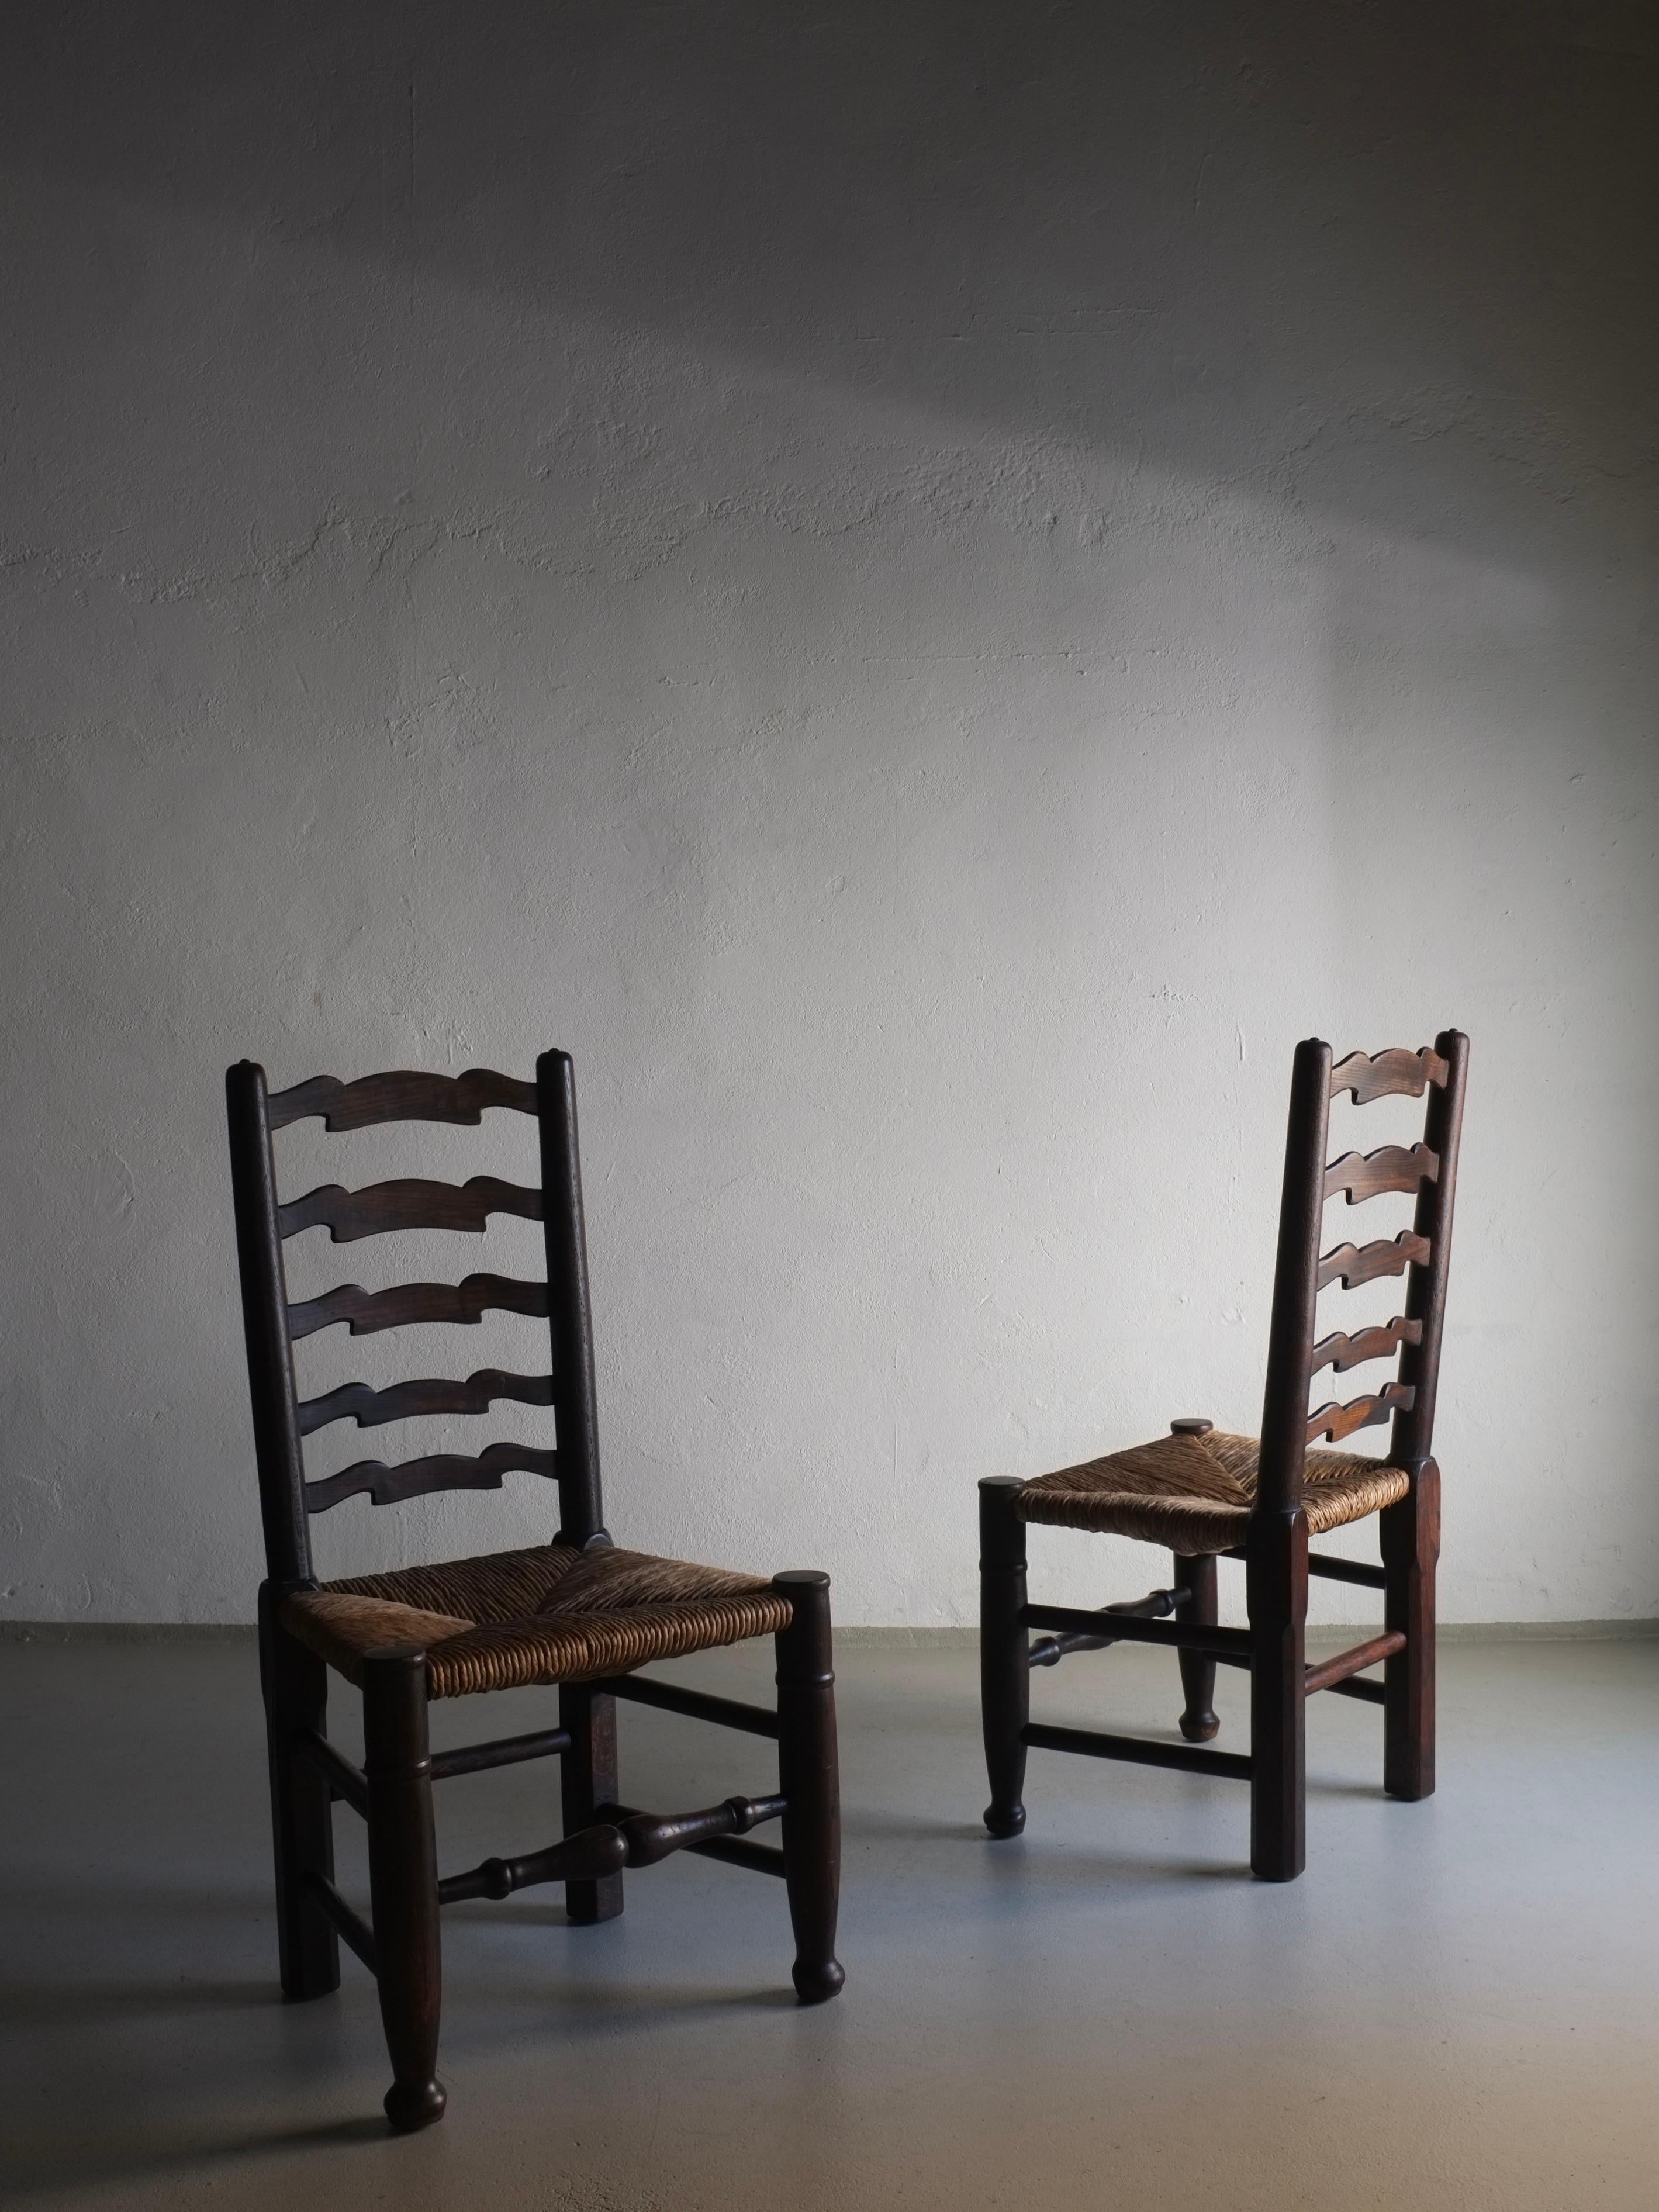 Rustic 4 Brutalist Ladder Back Straw Seat Chairs, England, 1900s For Sale